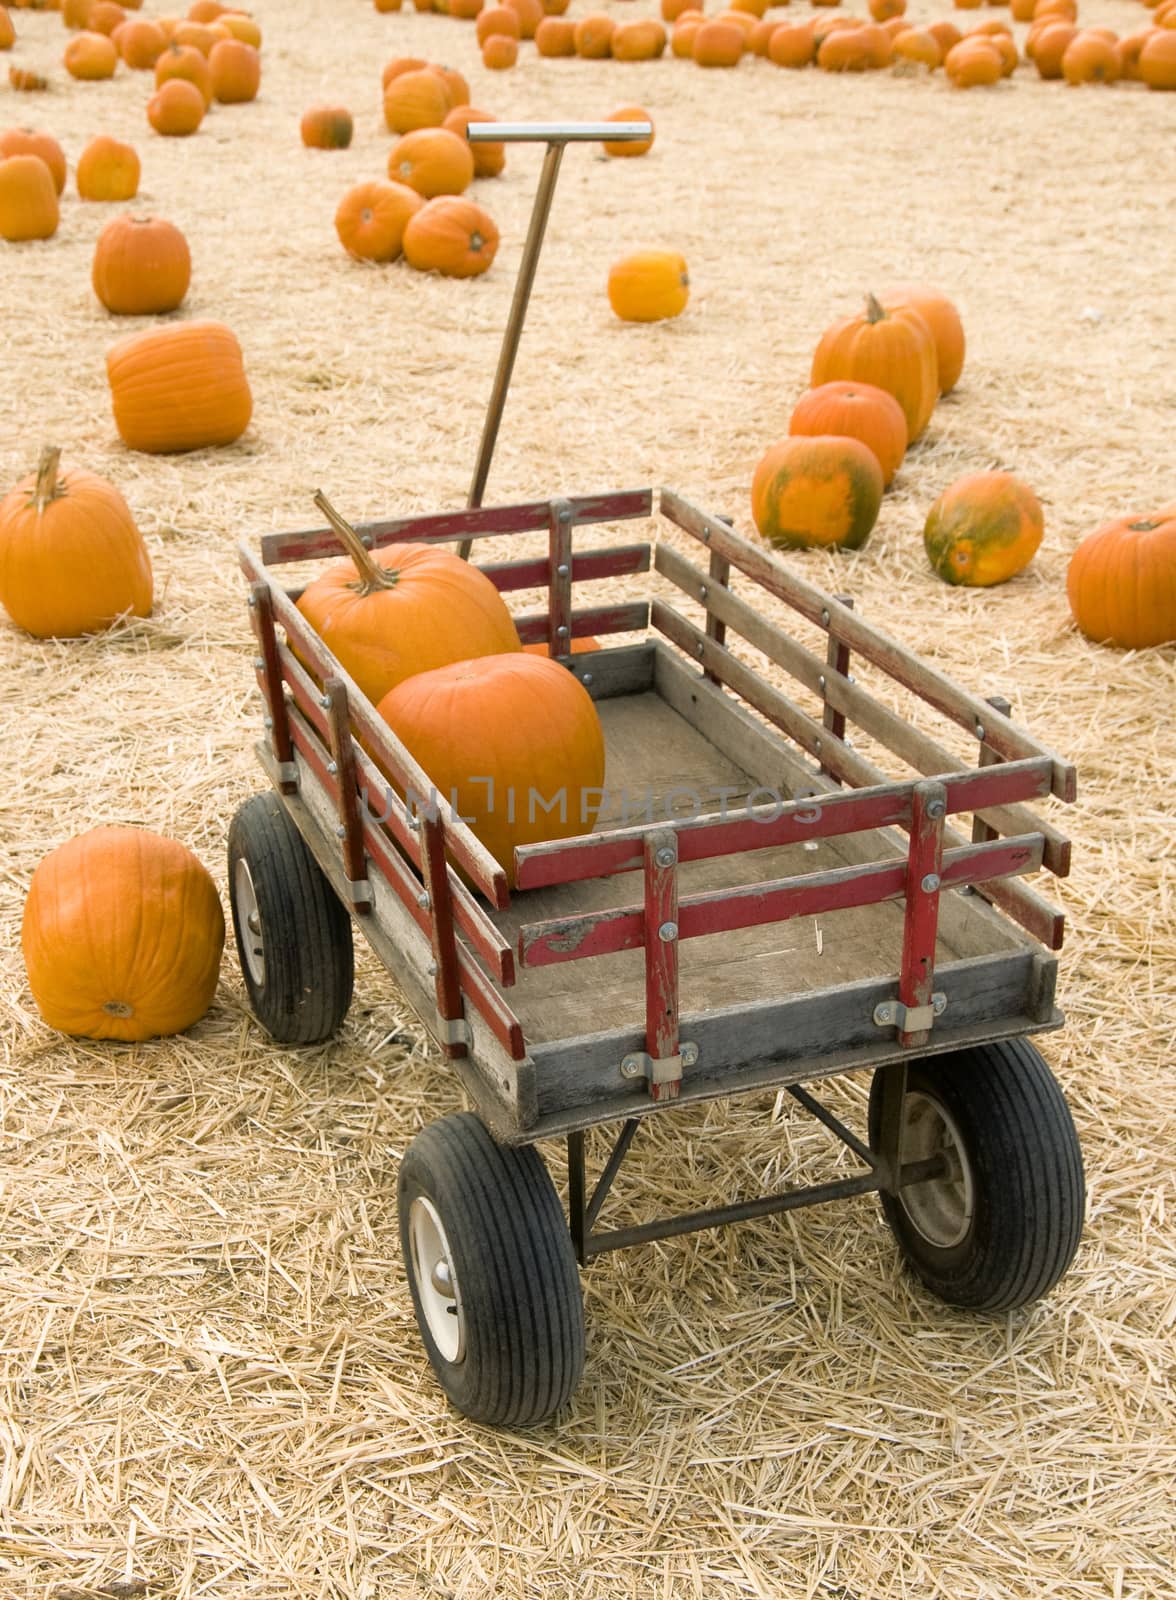 Pumpkins in red wagon by Njean